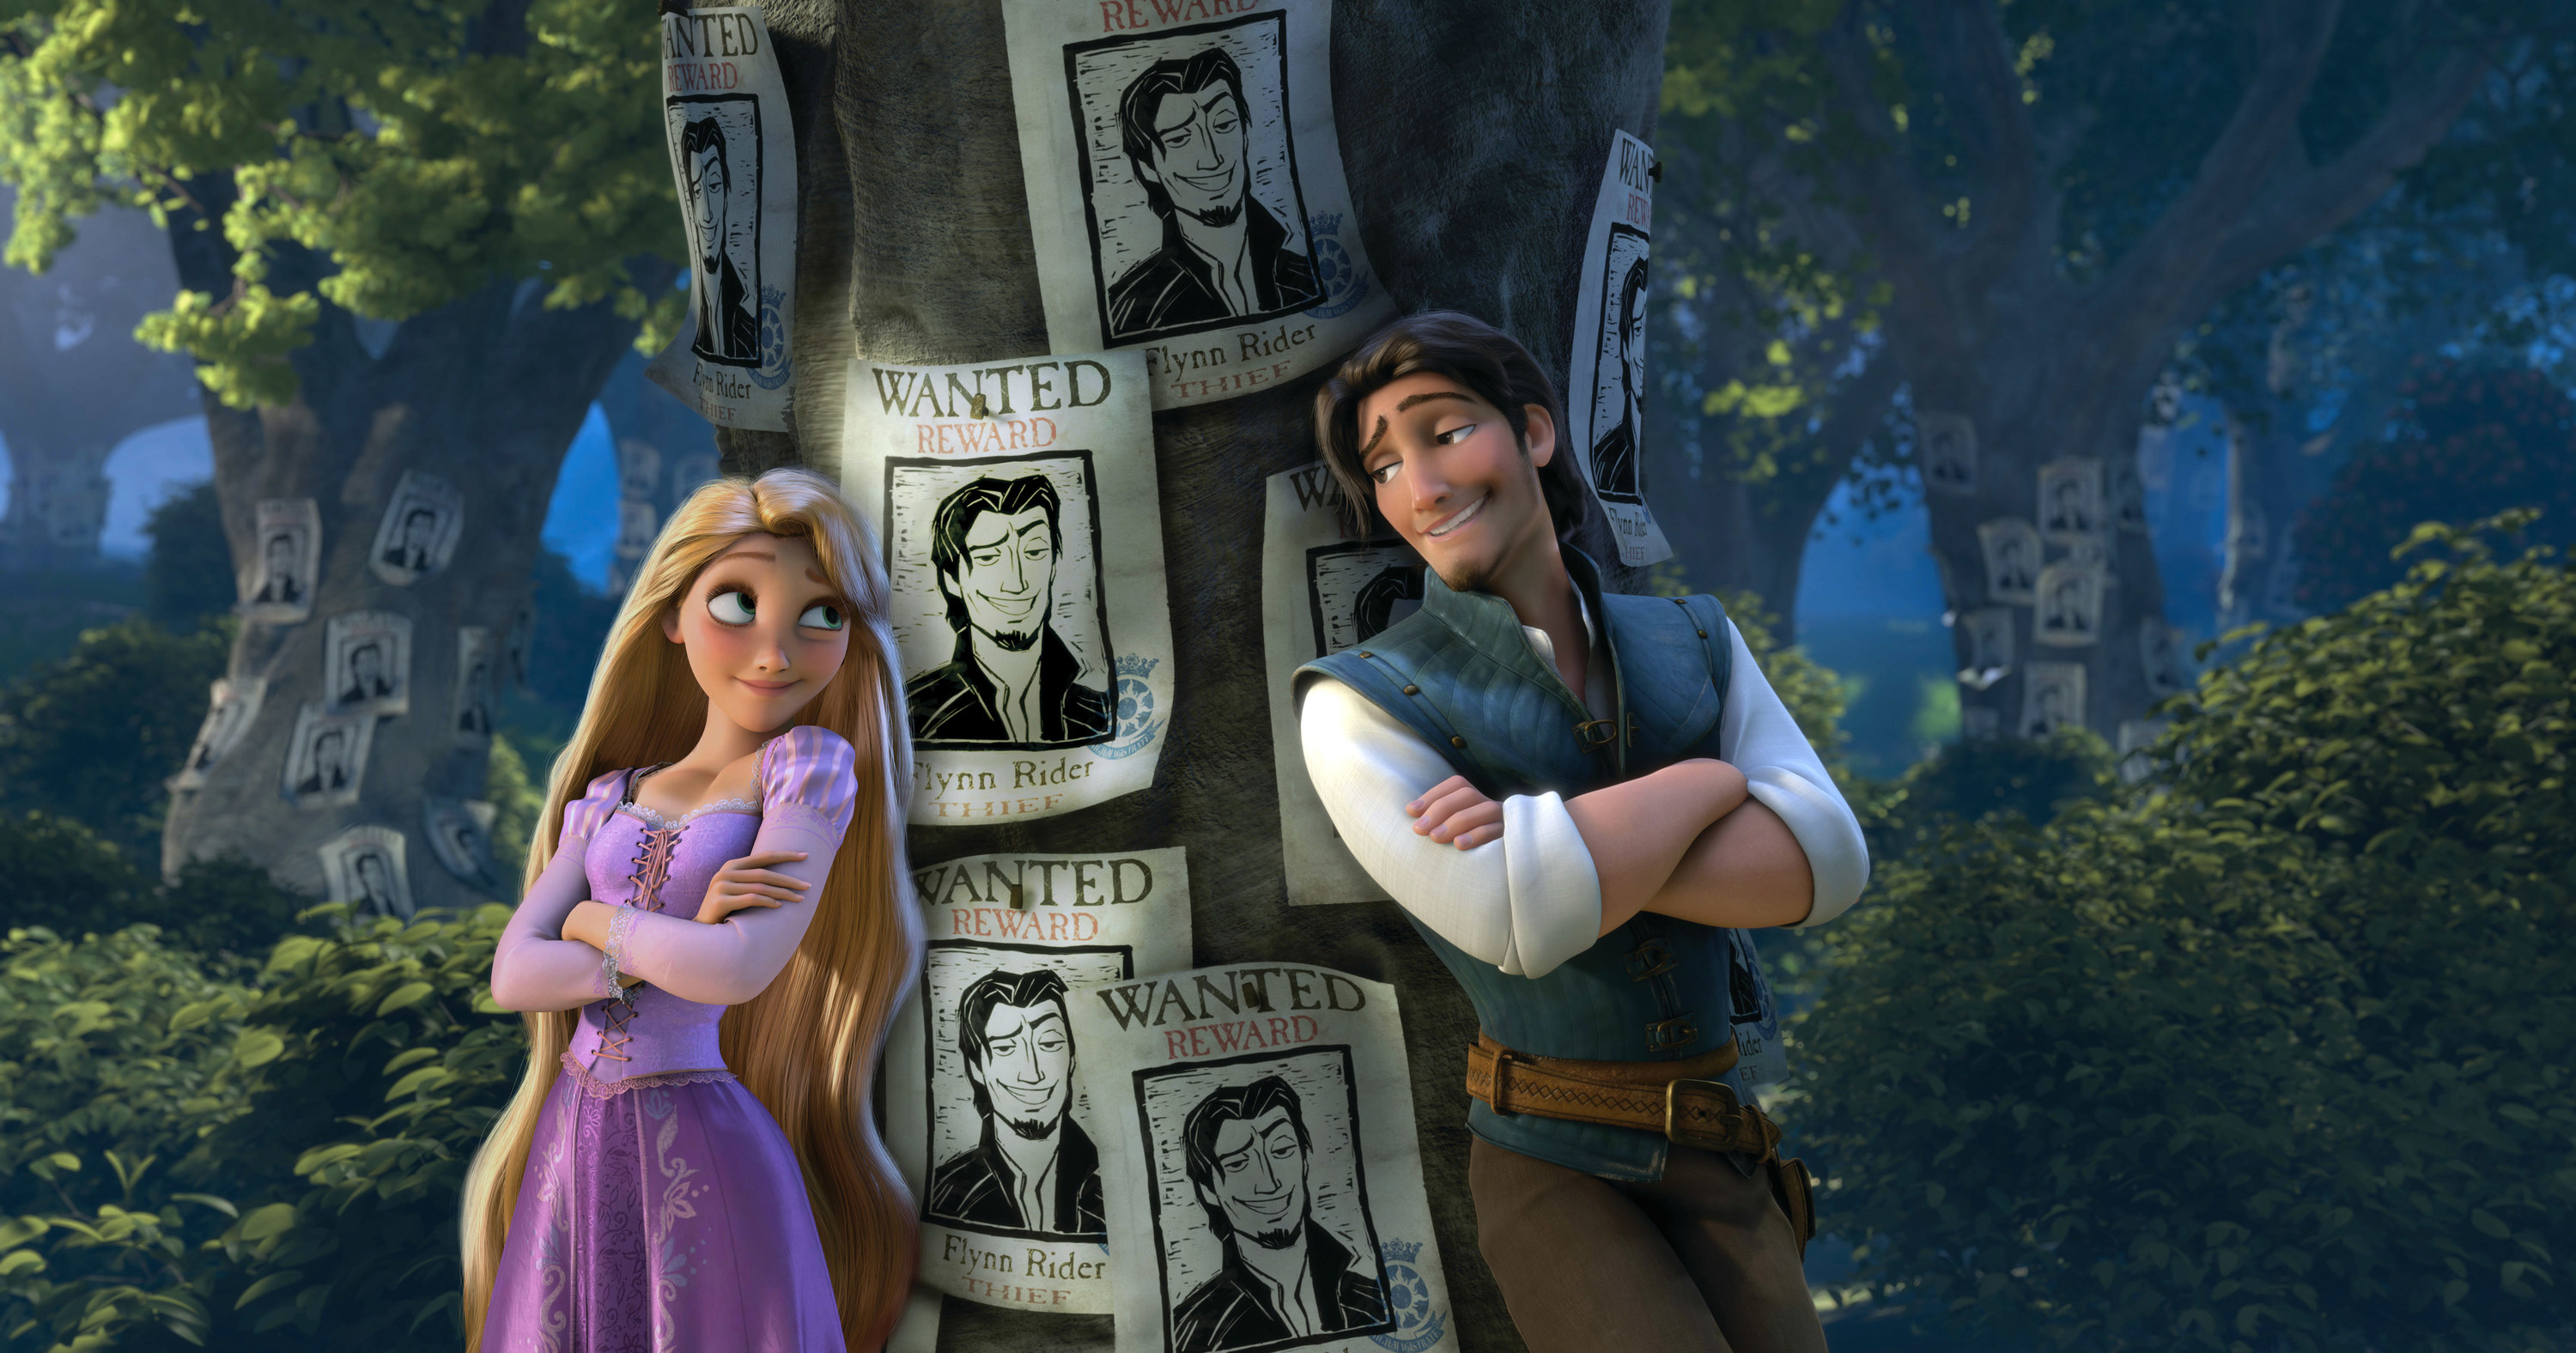 Photo of Rapunzel and Flynn leaning up against a tree with his wanted posters on it